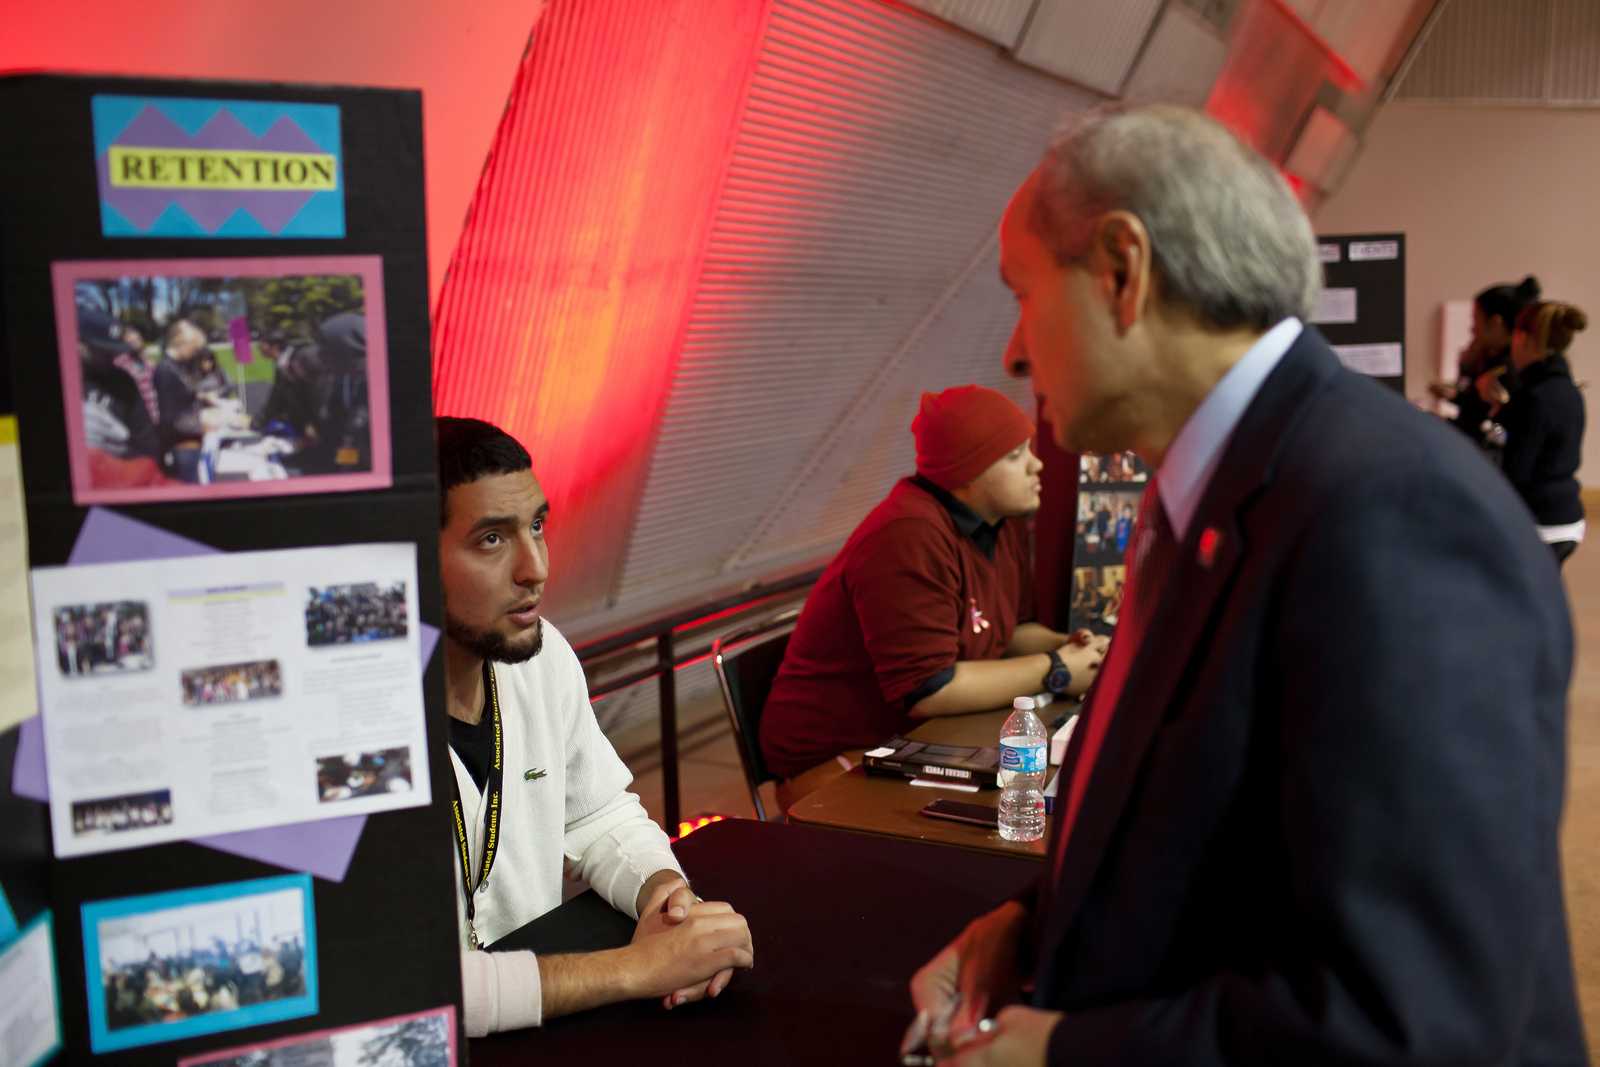 Issa Ibrahim, business major with ASI Project Connect, discusses scholarships with President Leslie E. Wong at the World AIDS Day event at SF State on Tuesday, Dec. 3 2013. The event is part of a global effort to increase awareness which occurs annually on the first of December. Photo by Dariel Medina / Xpress